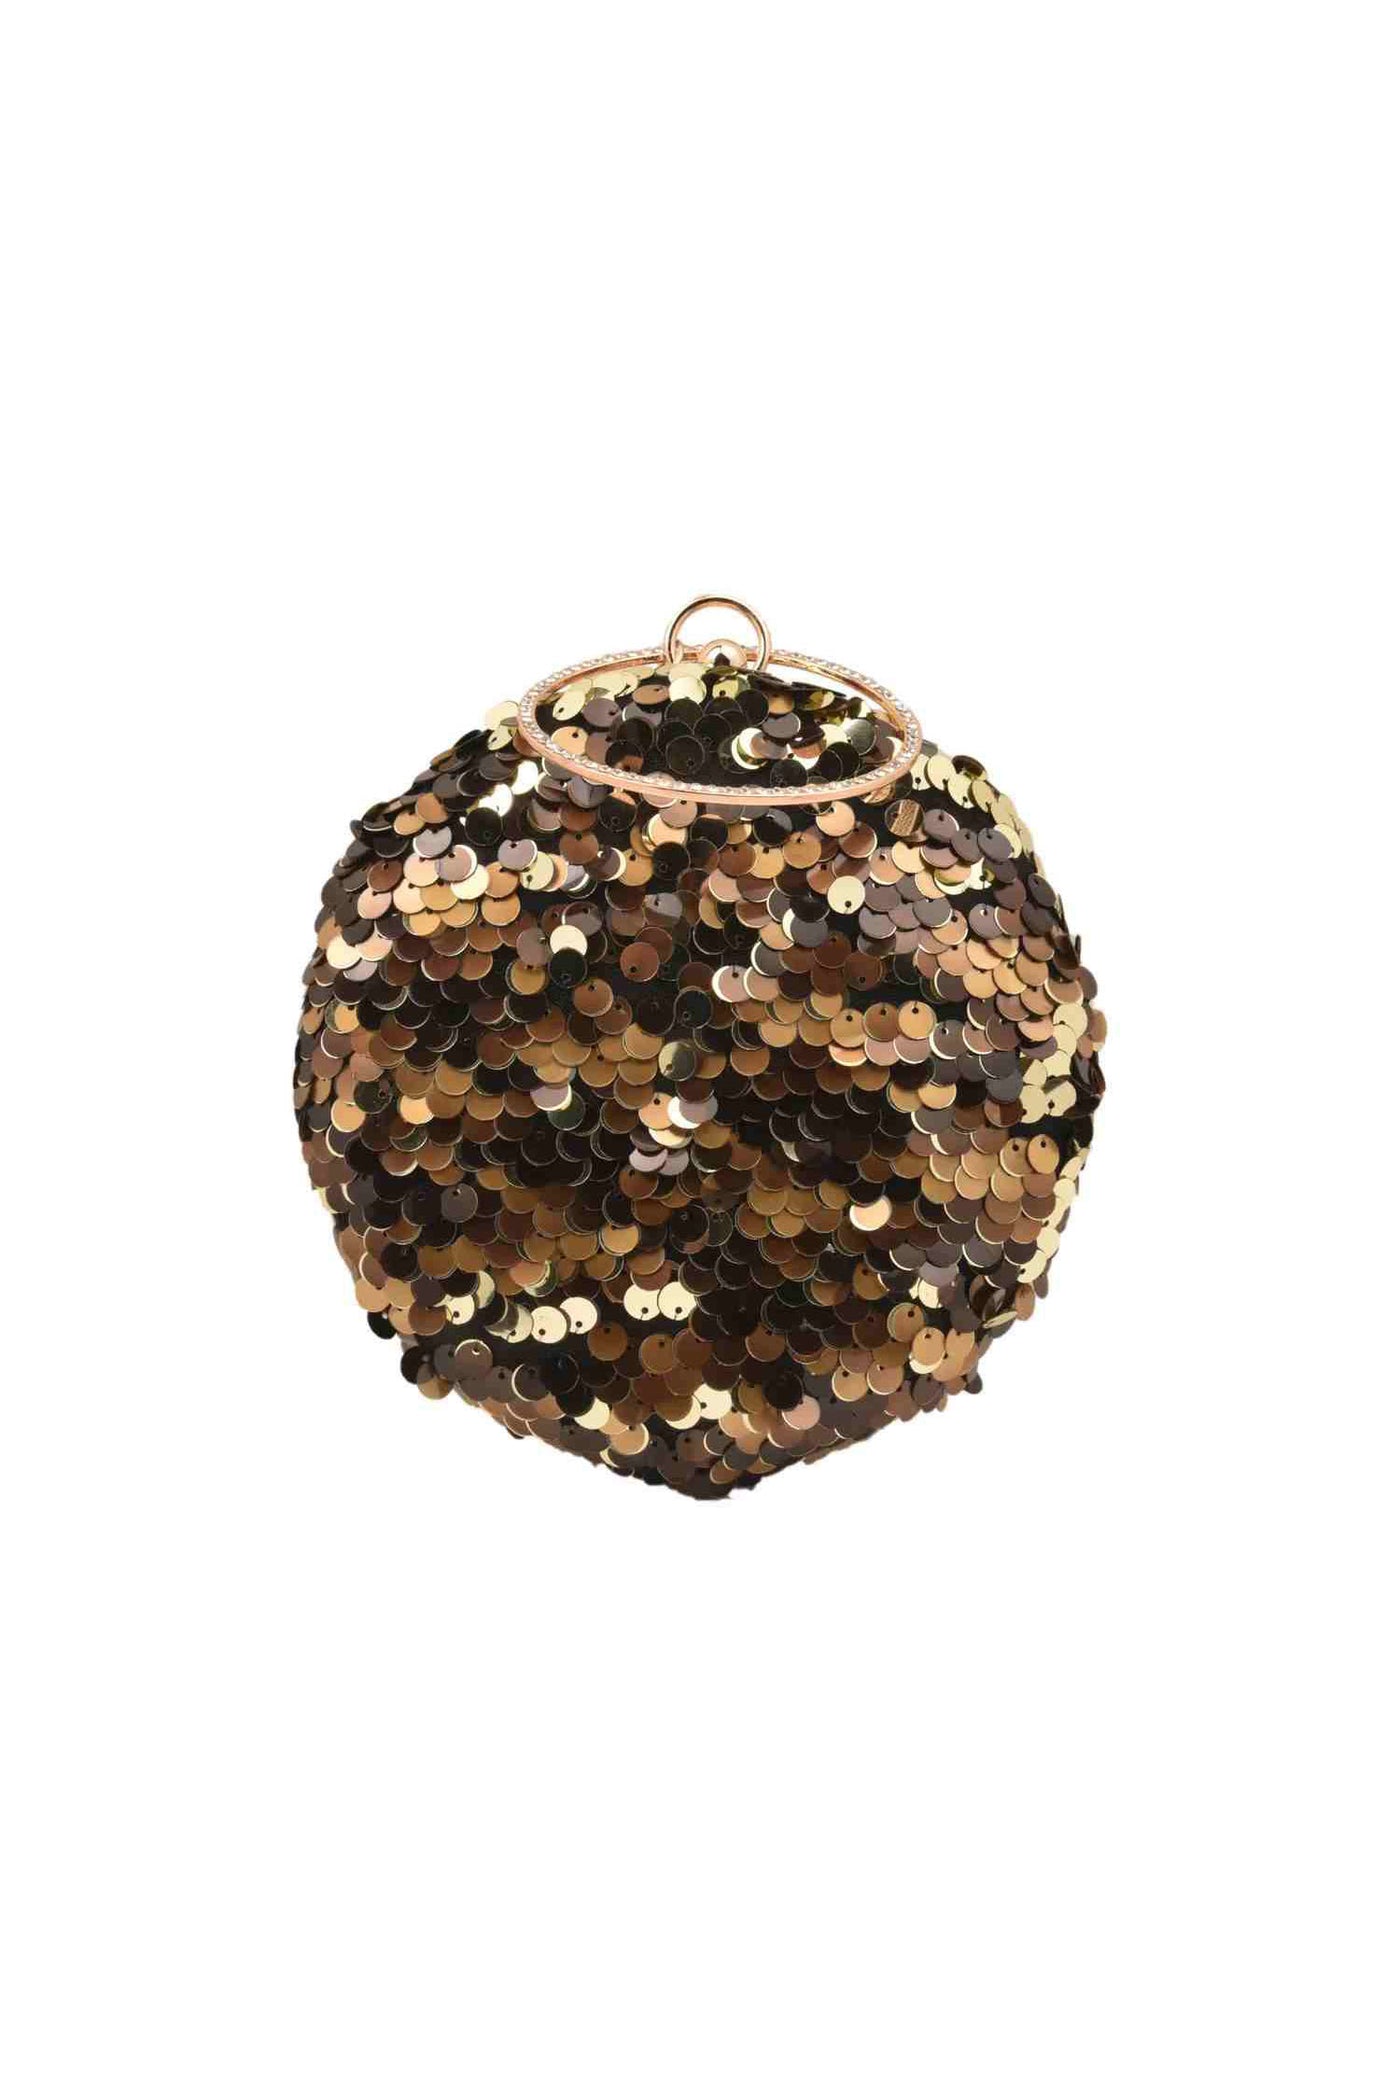 Black, Brown and Gold Sequins Circular Clutch